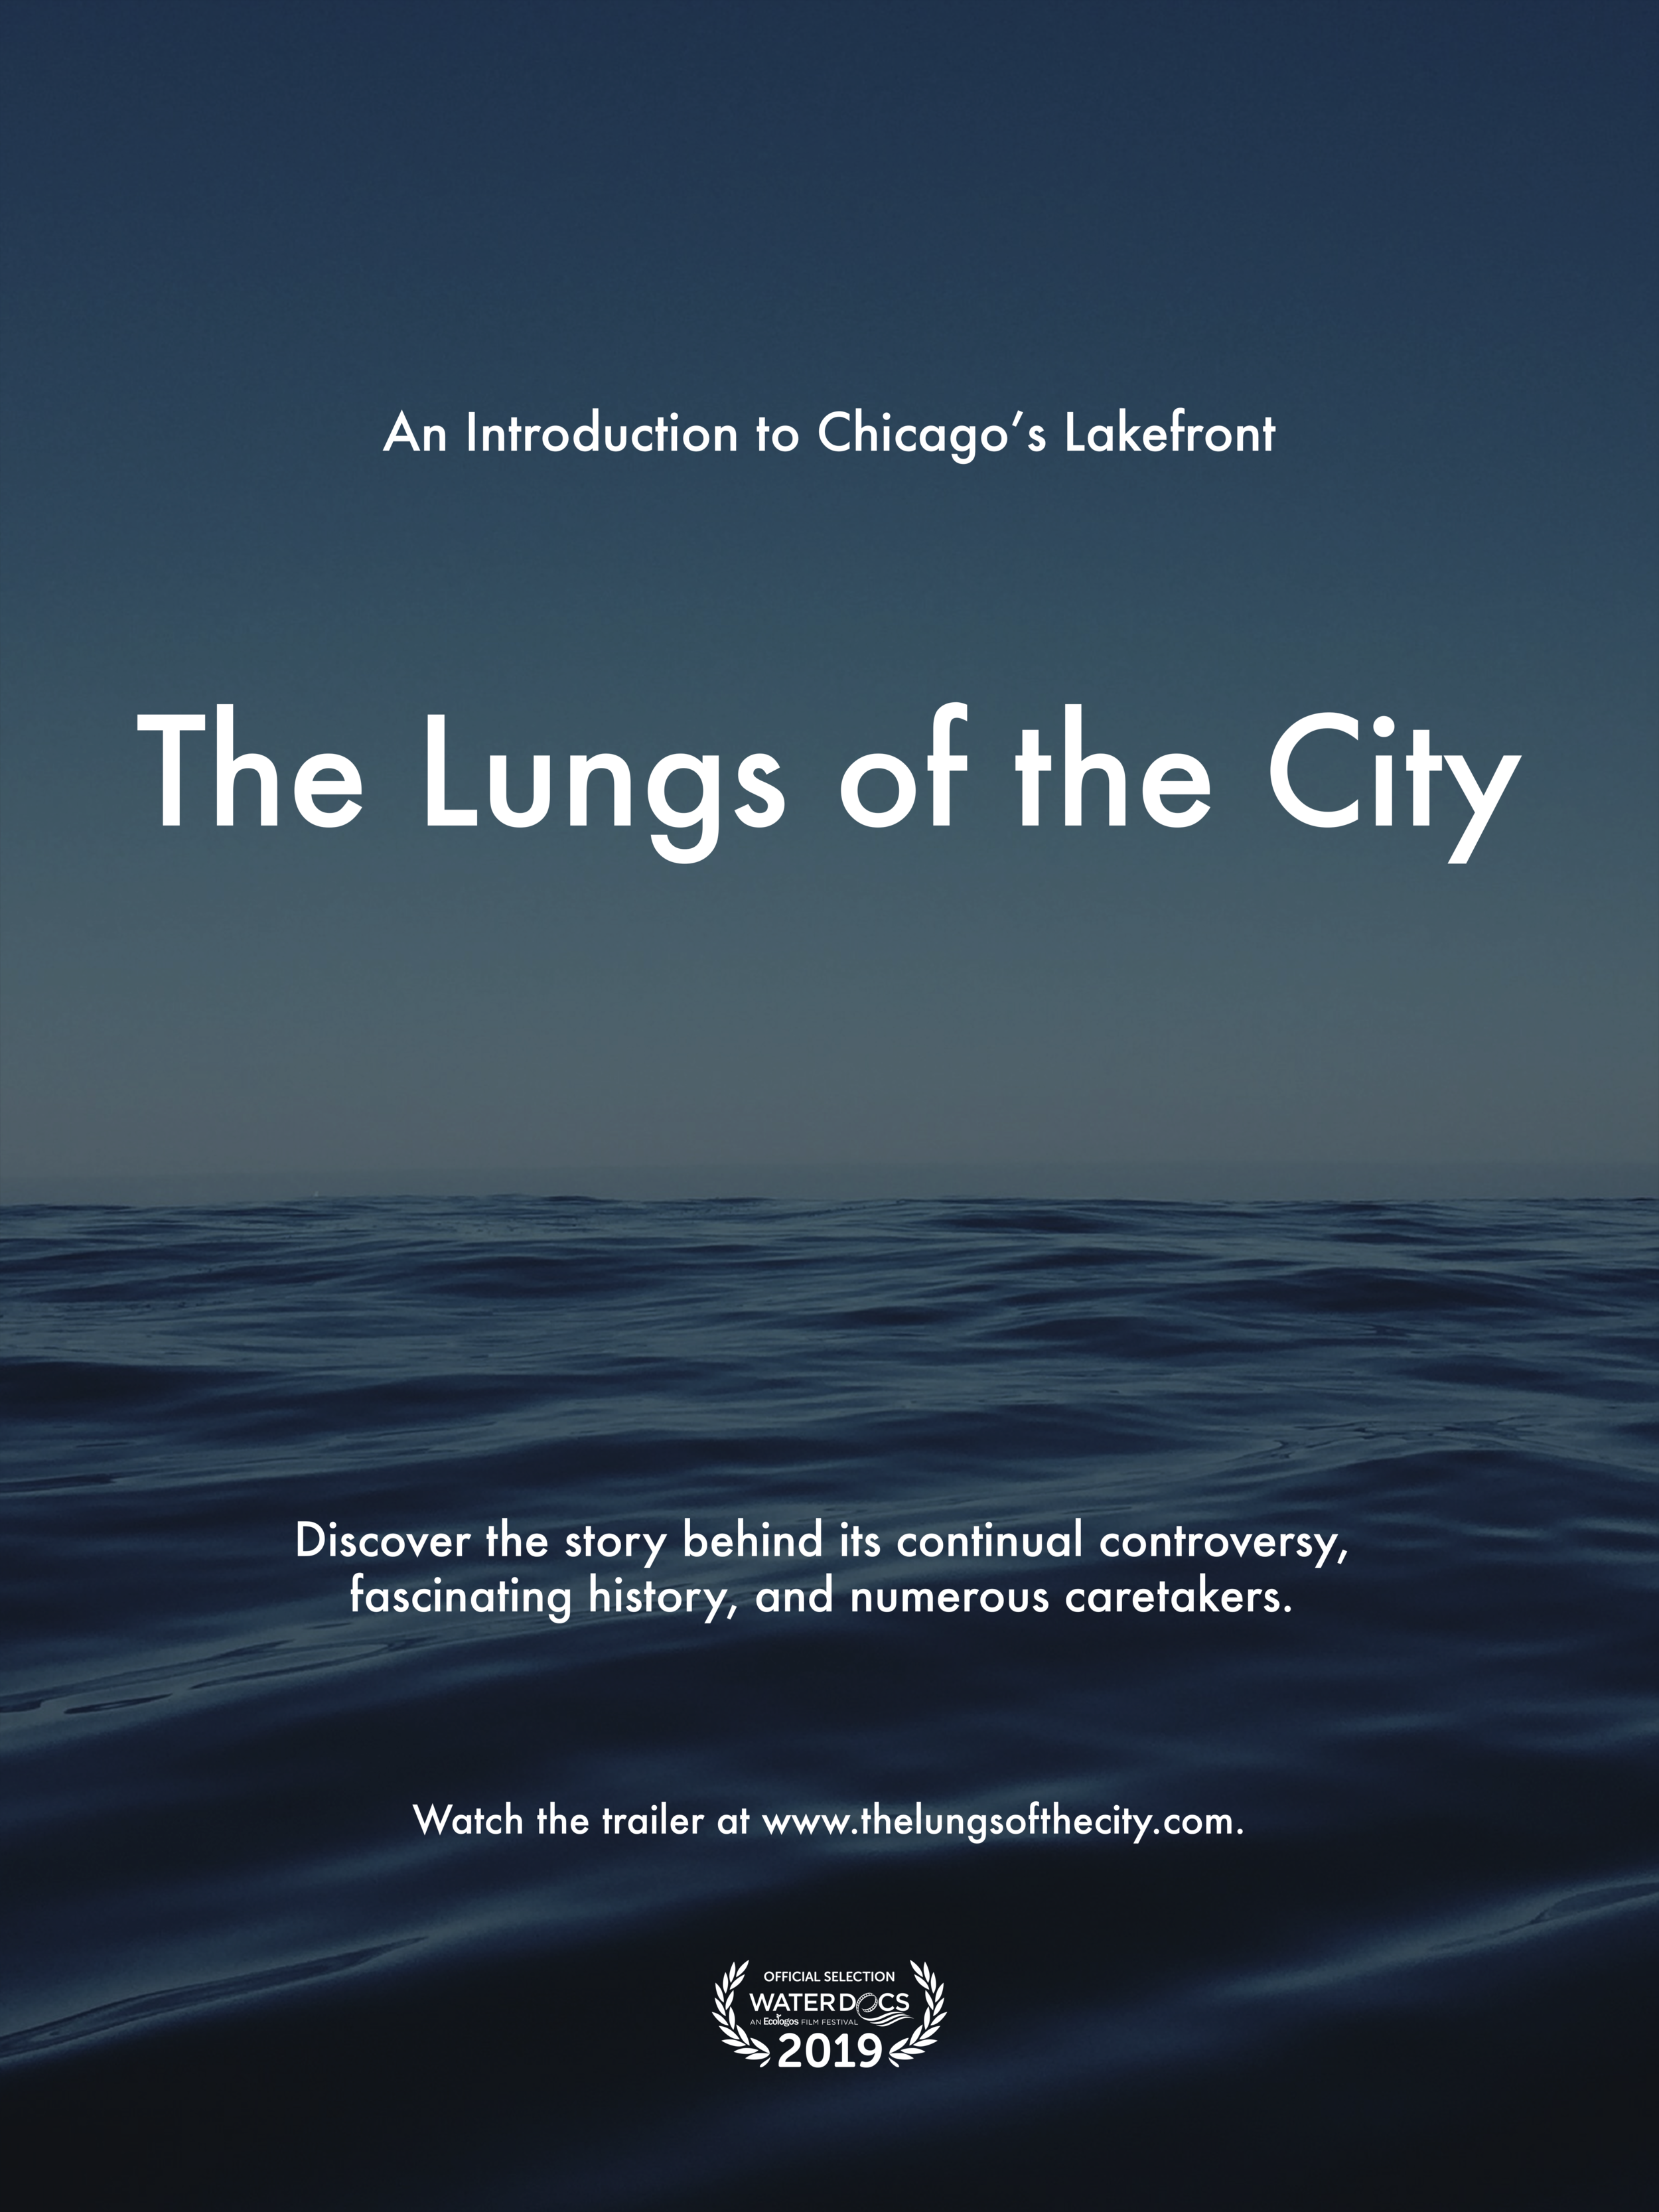 The Lungs of the City Poster with WD laurels (1).png